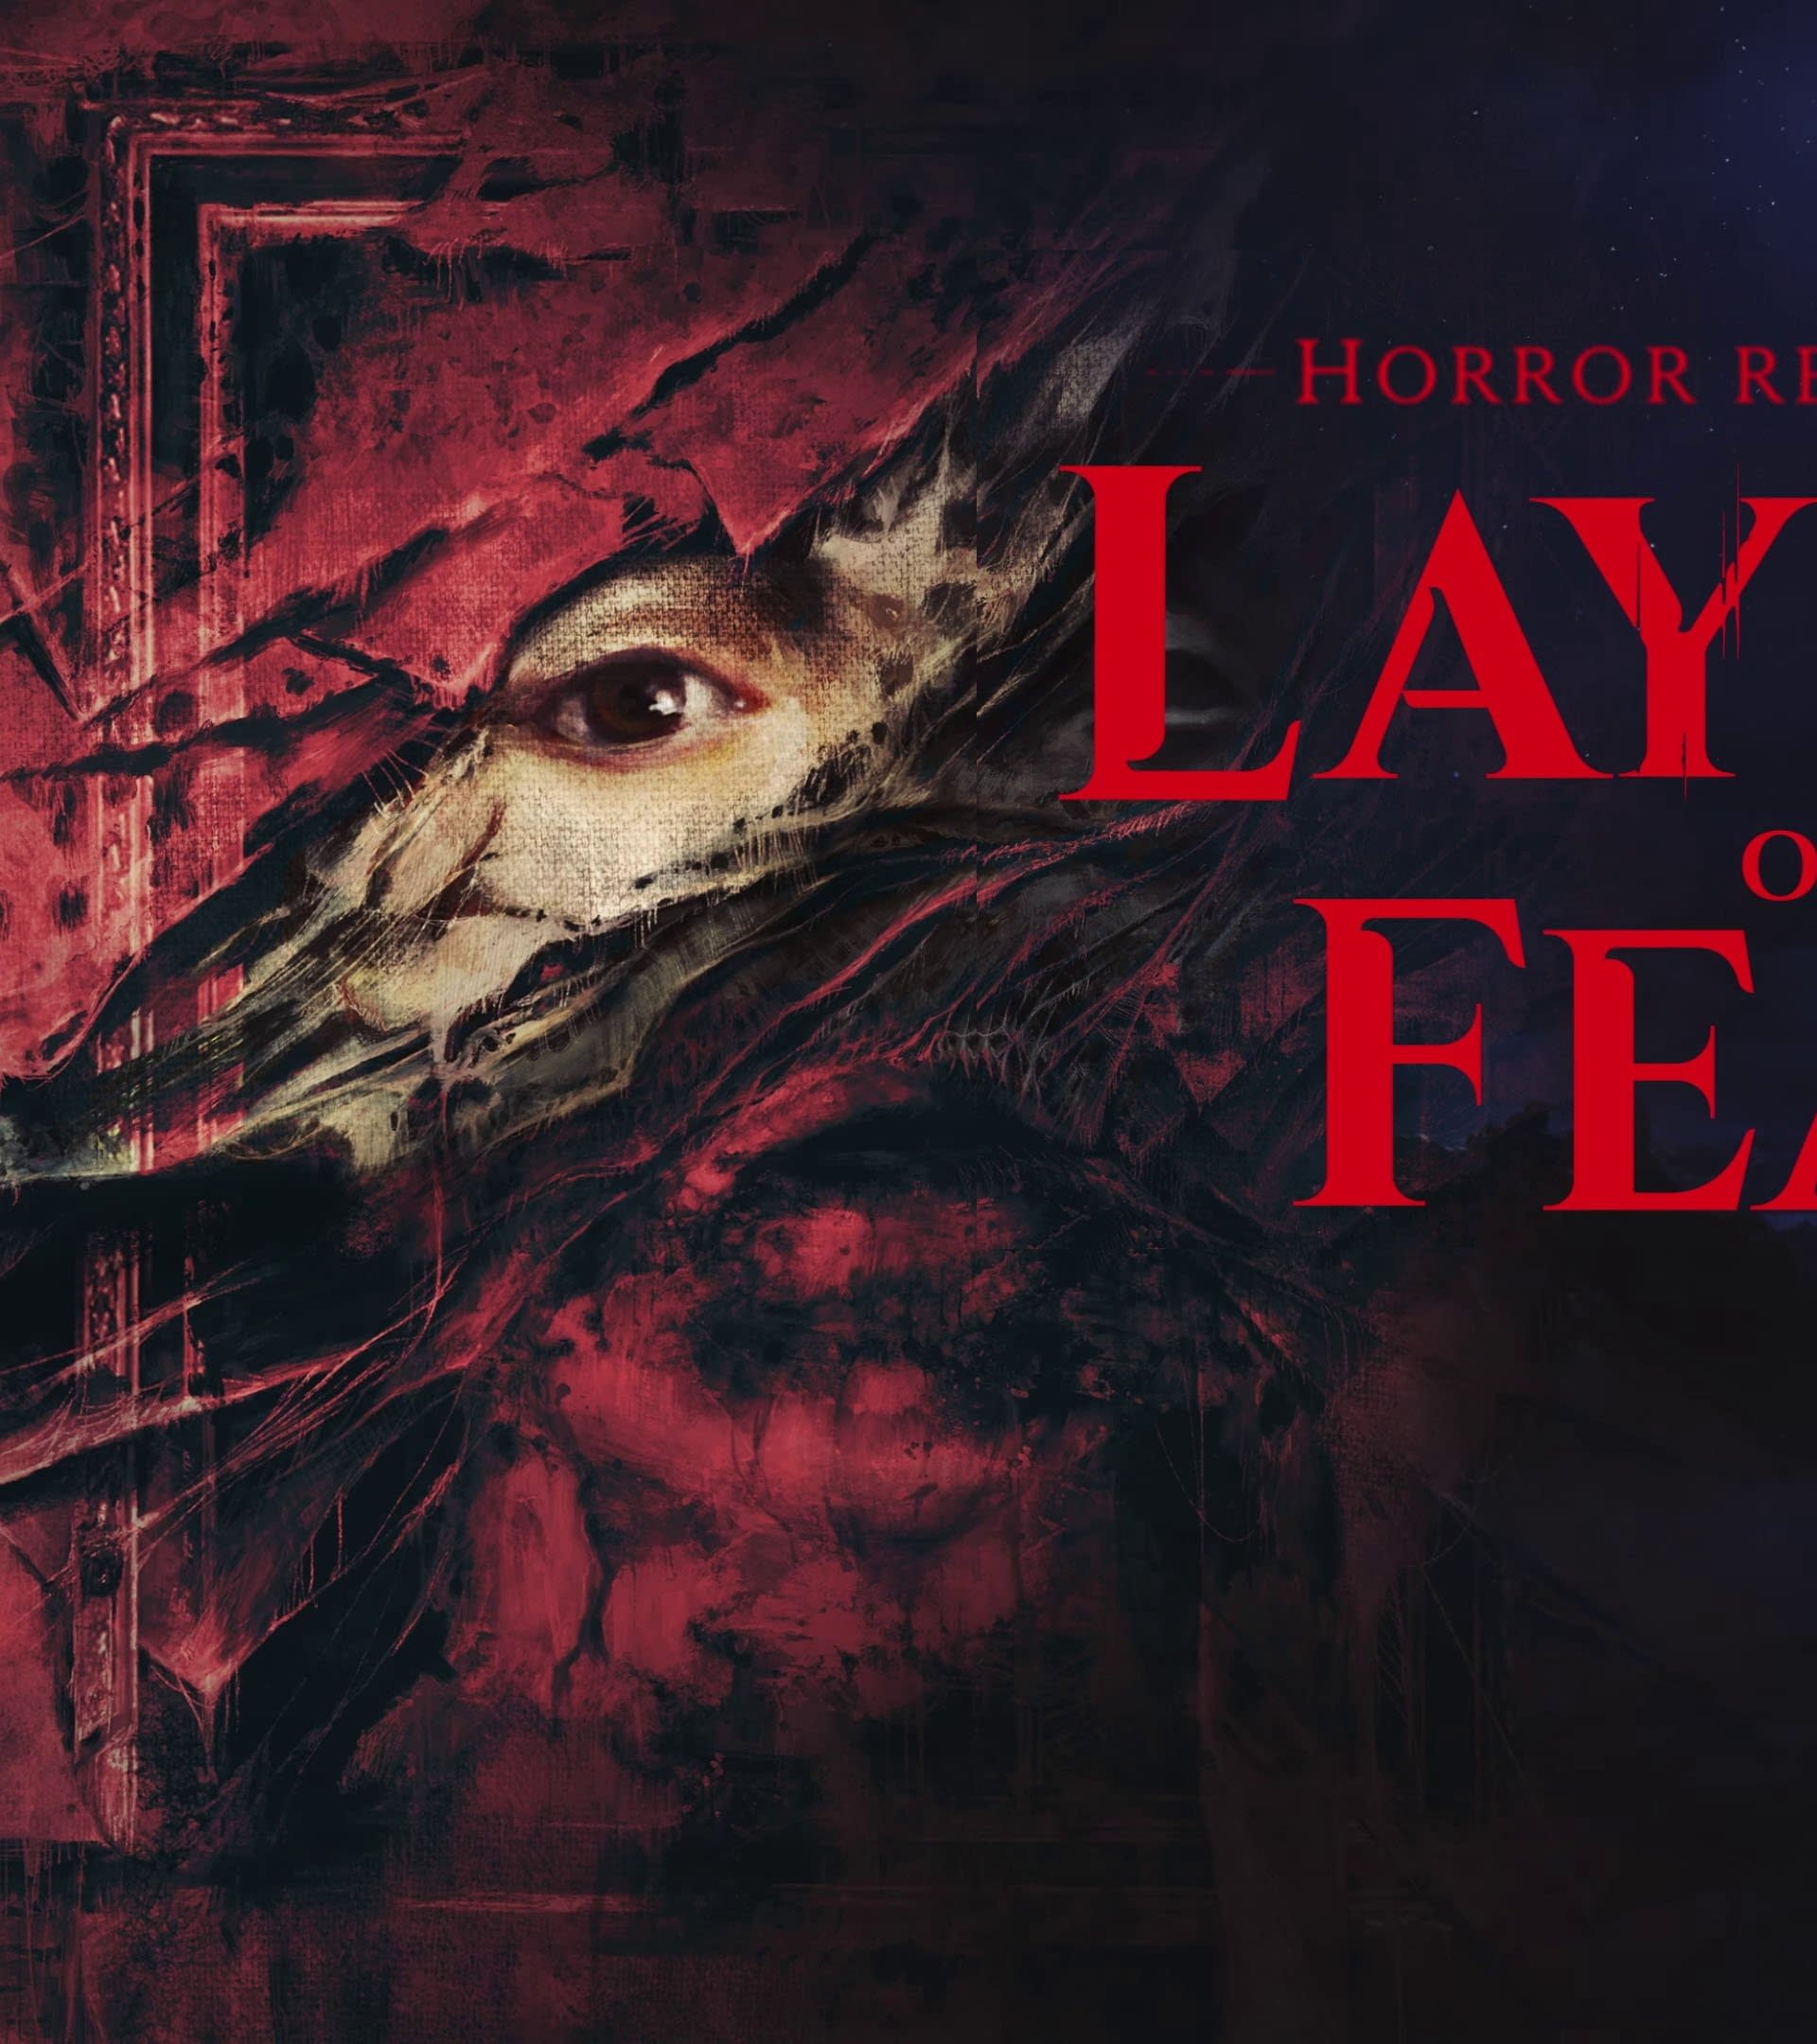 Bloober Team Announces the Released Moon of the Horror Game Layers of Fear